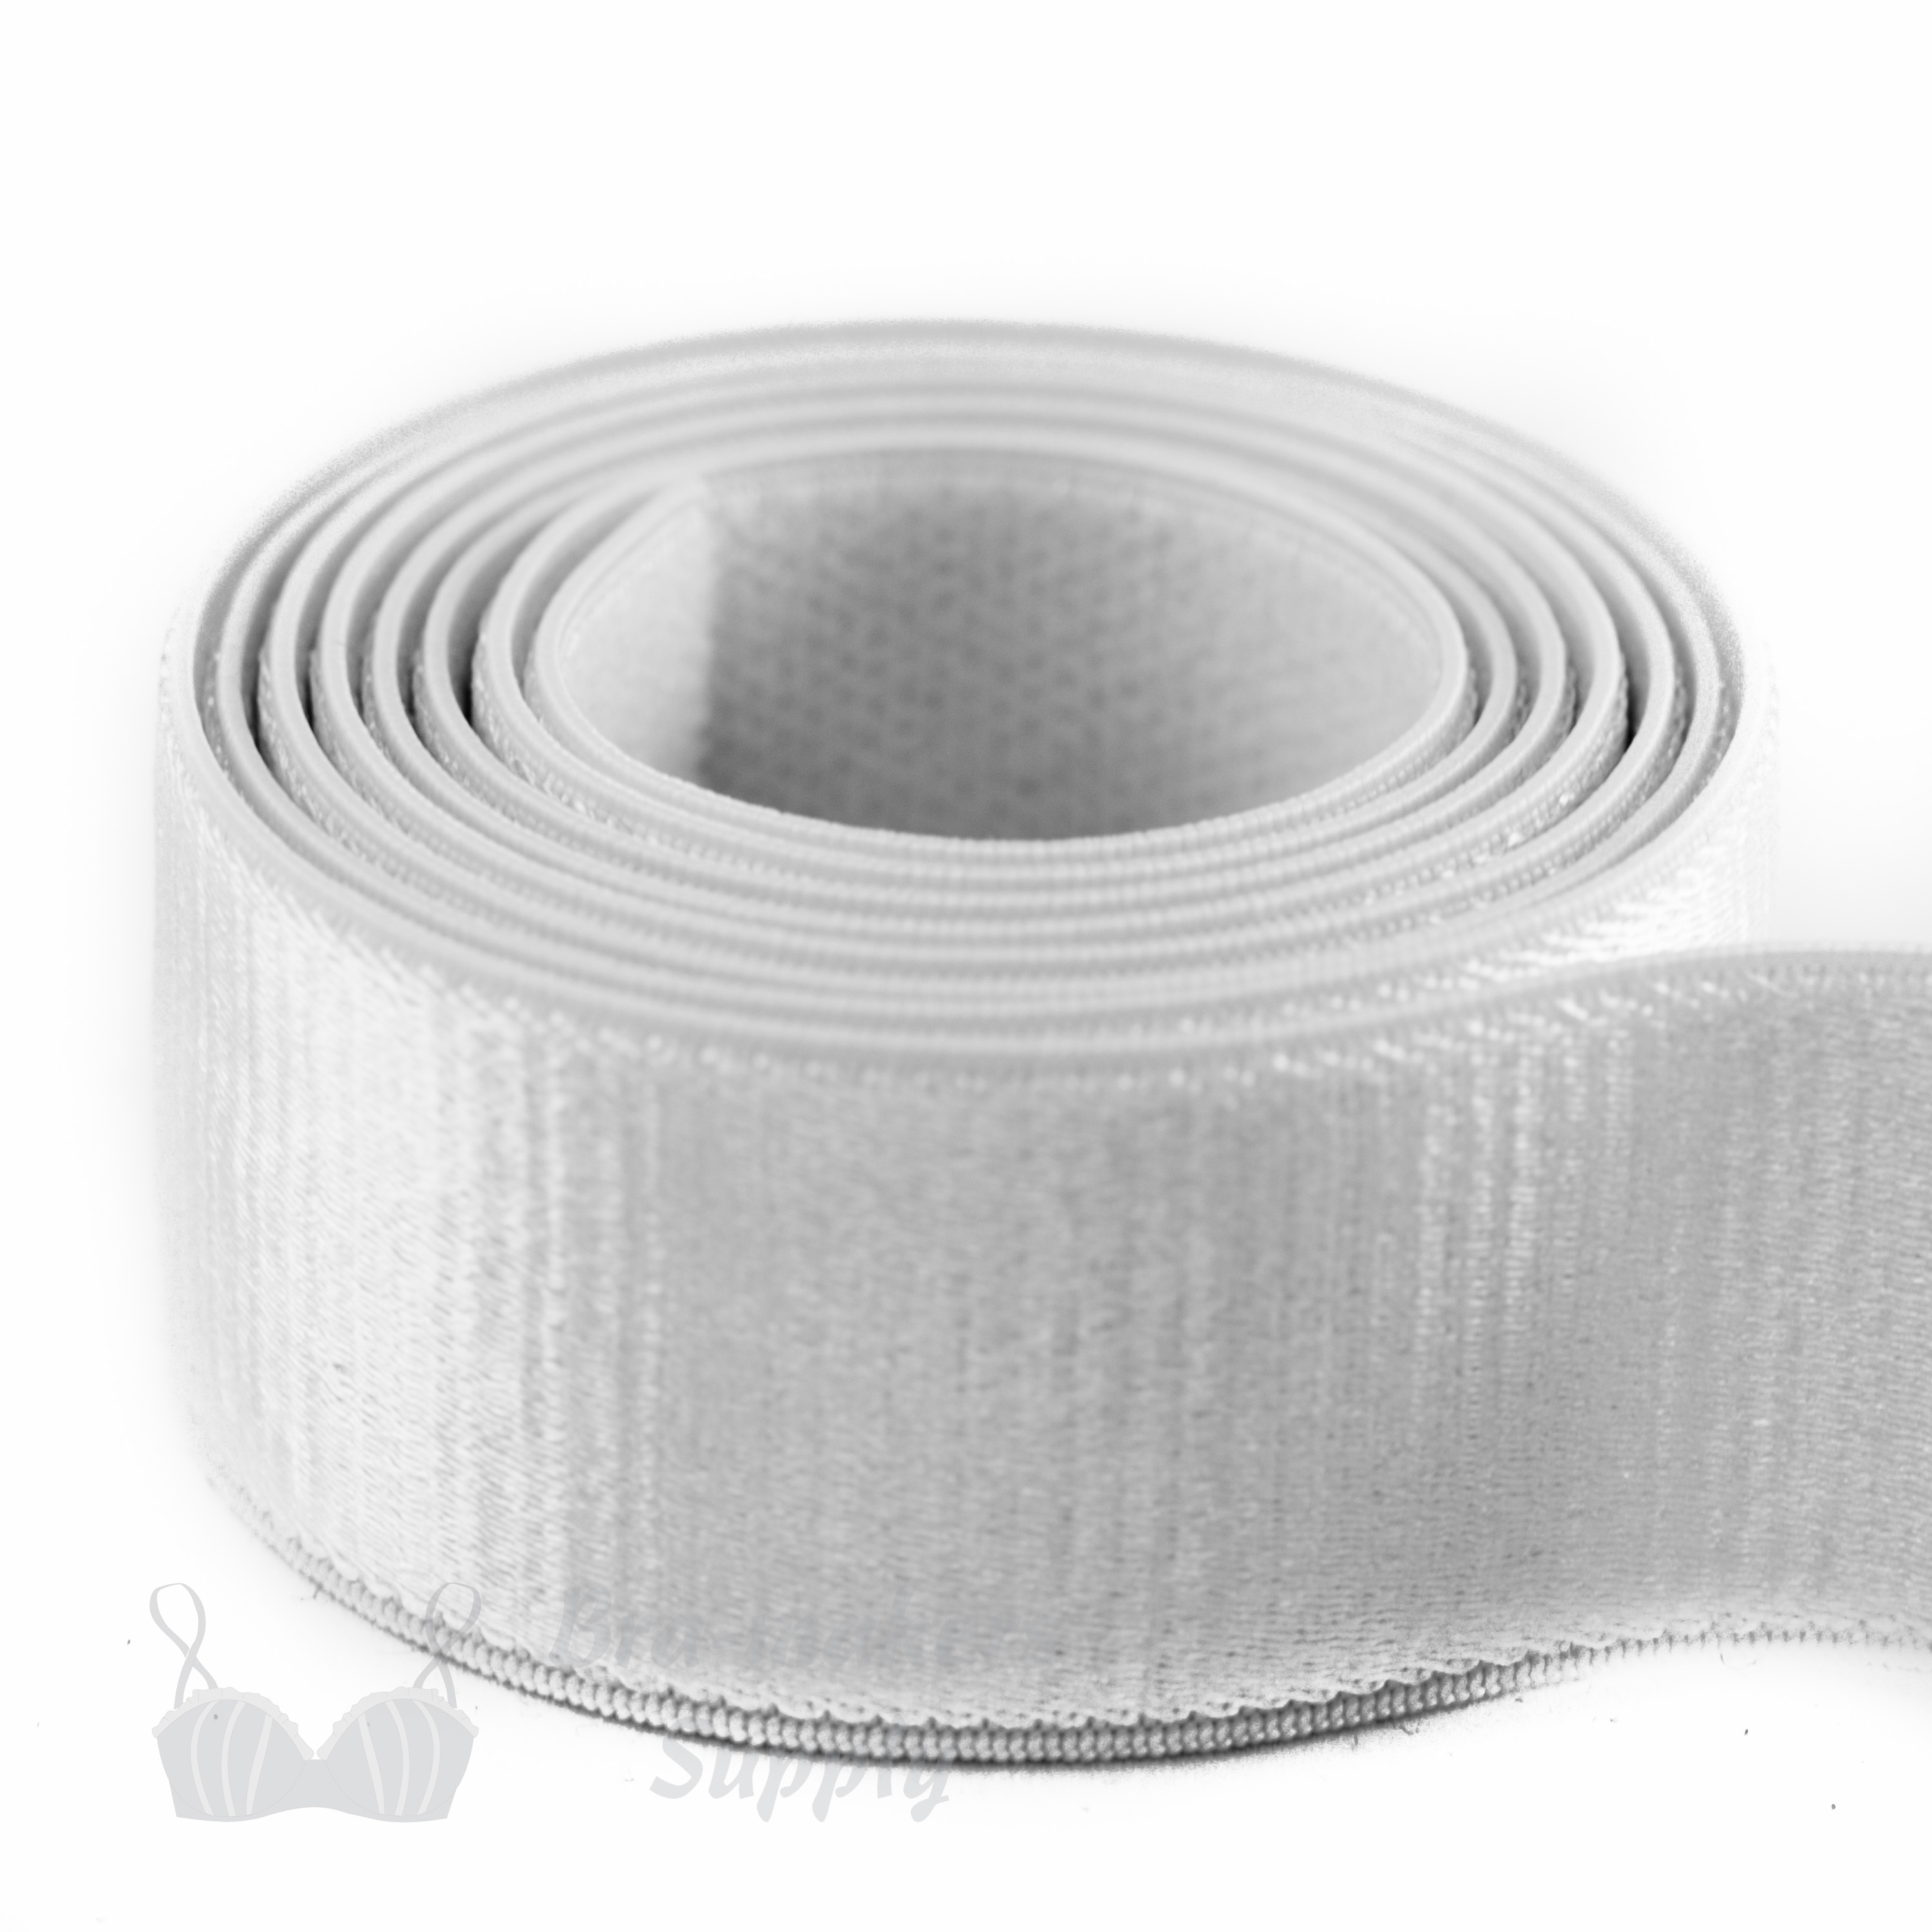 one inch 22mm Strap Elastic white ES-8 or one inch 22mm Satin Strap Elastic Bright White Pantone 11-0601 from Bra-makers Supply 1 metre roll shown